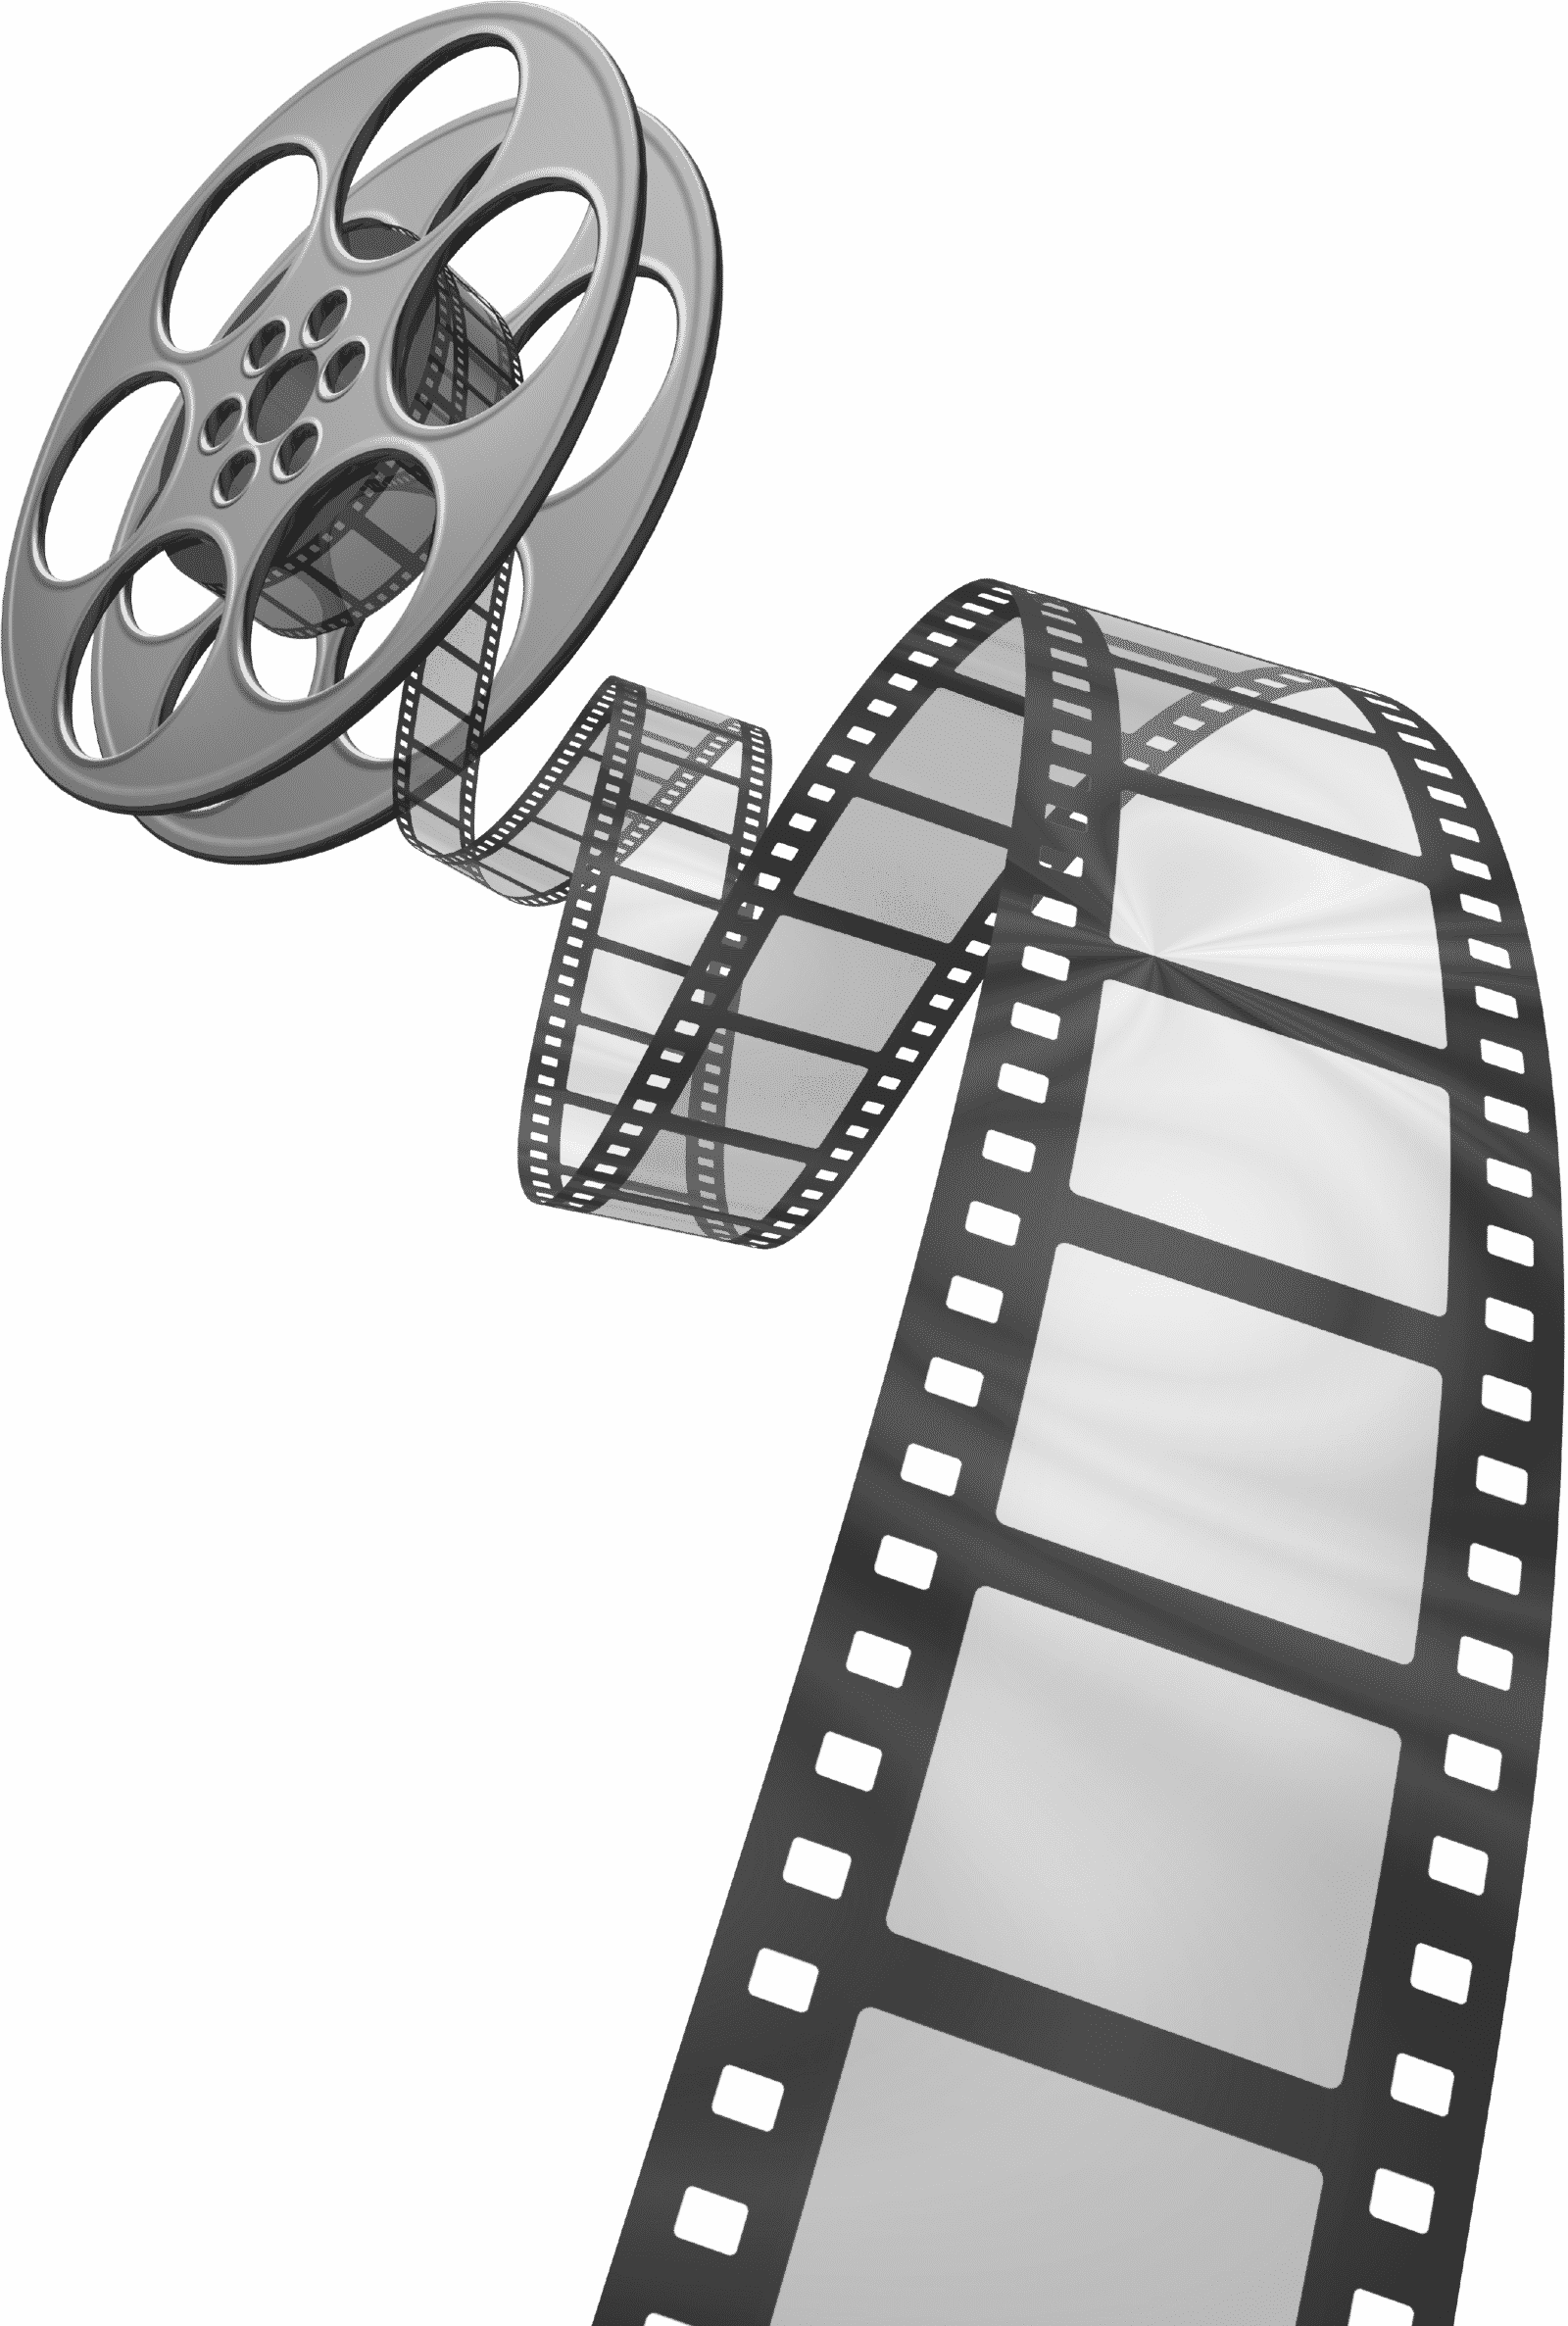 movie clipart booth